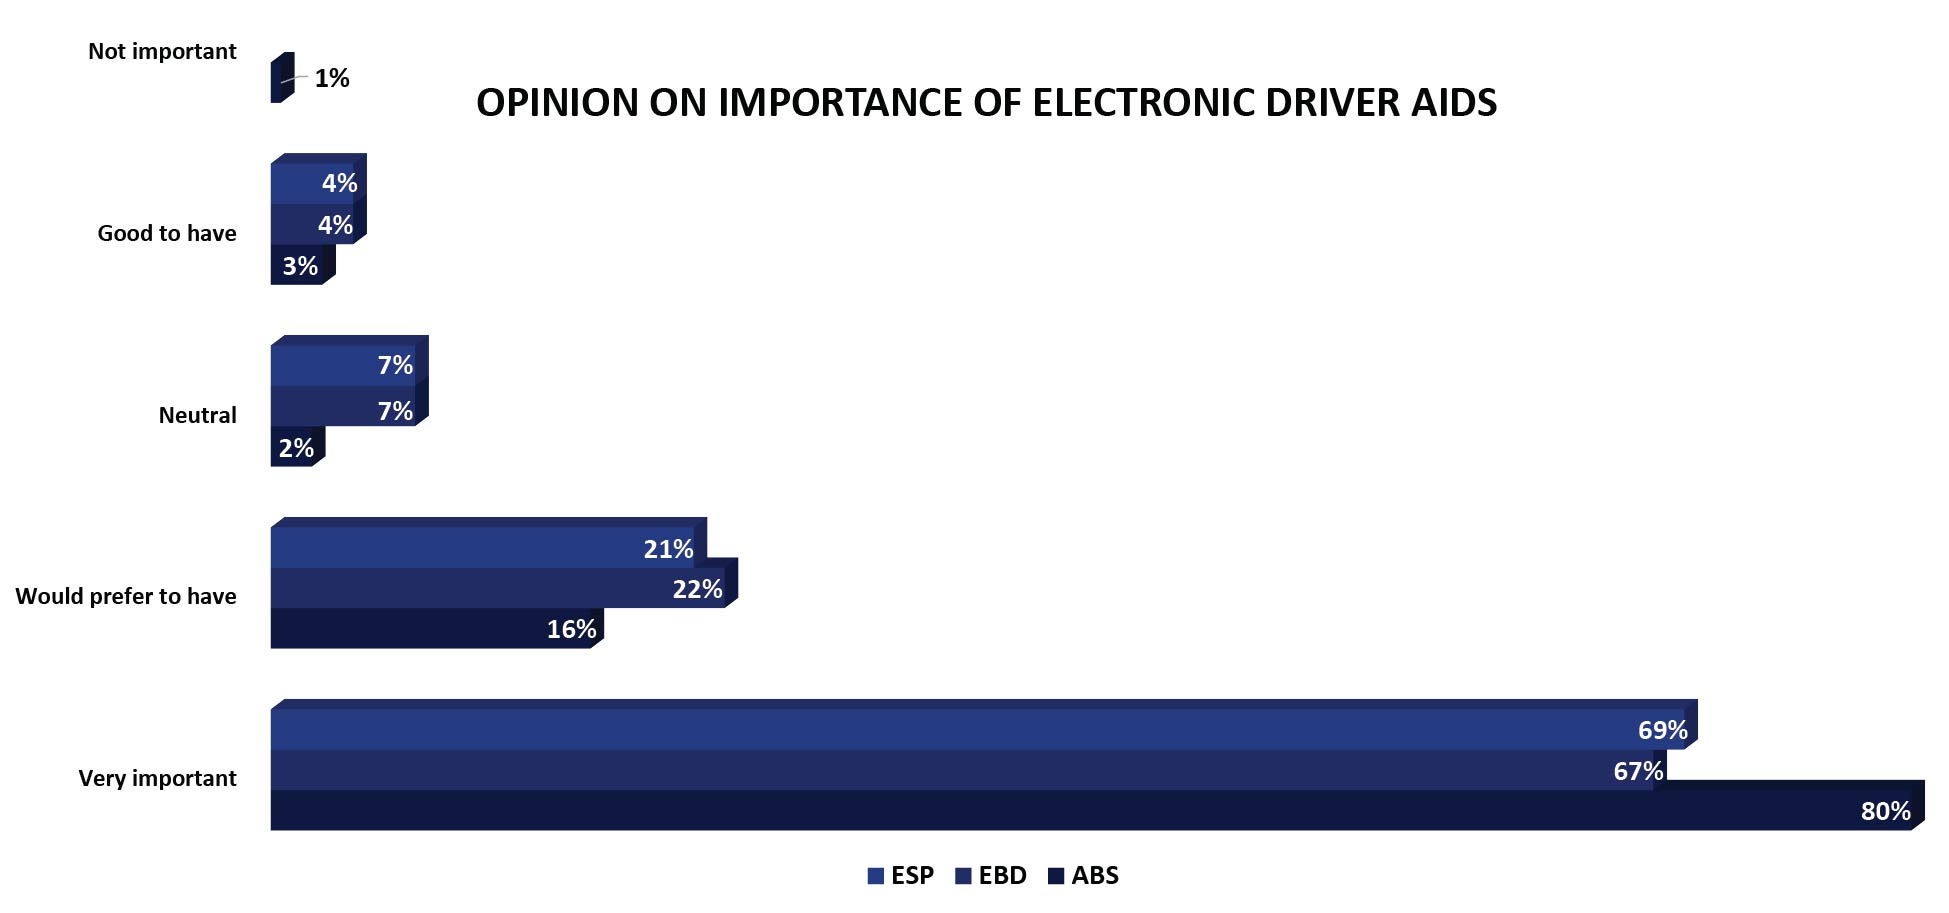 Importance of Electronic Driver AIDS in Brazil